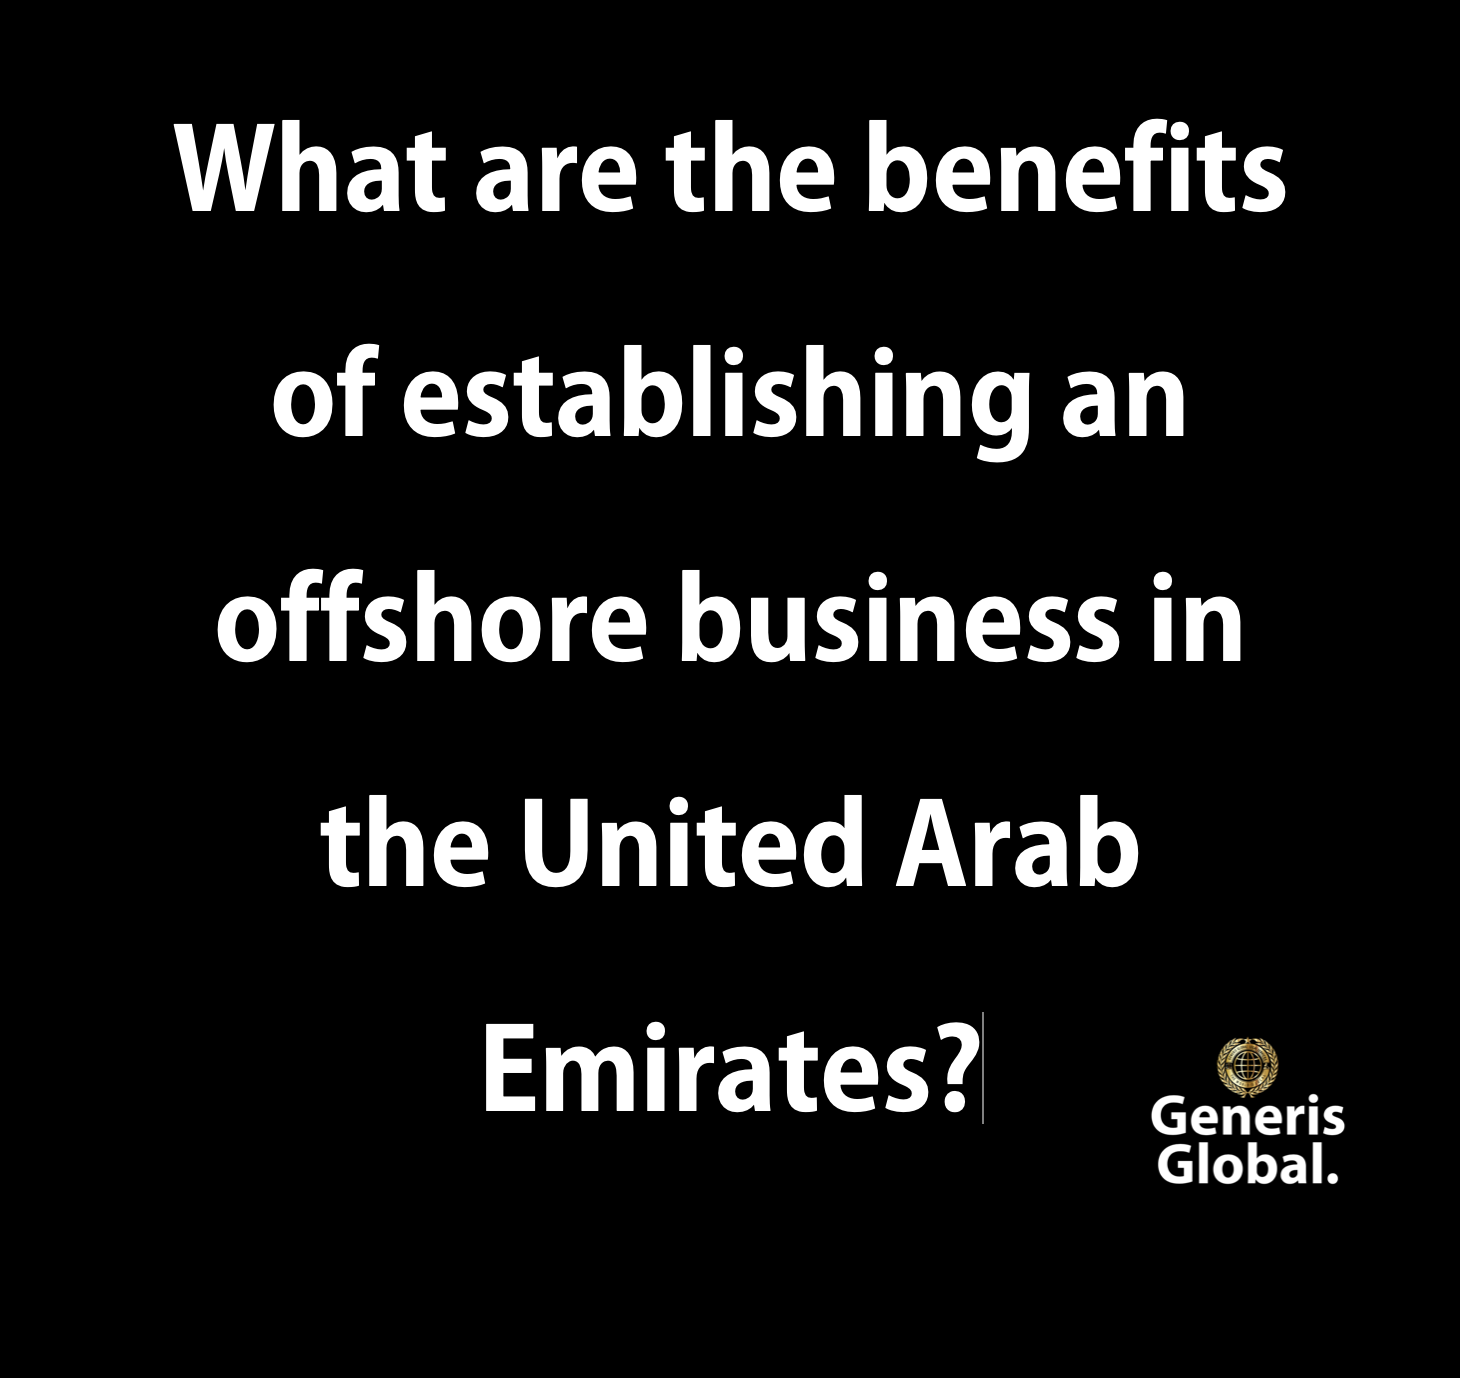 What are the benefits of establishing an offshore business in the United Arab Emirates?